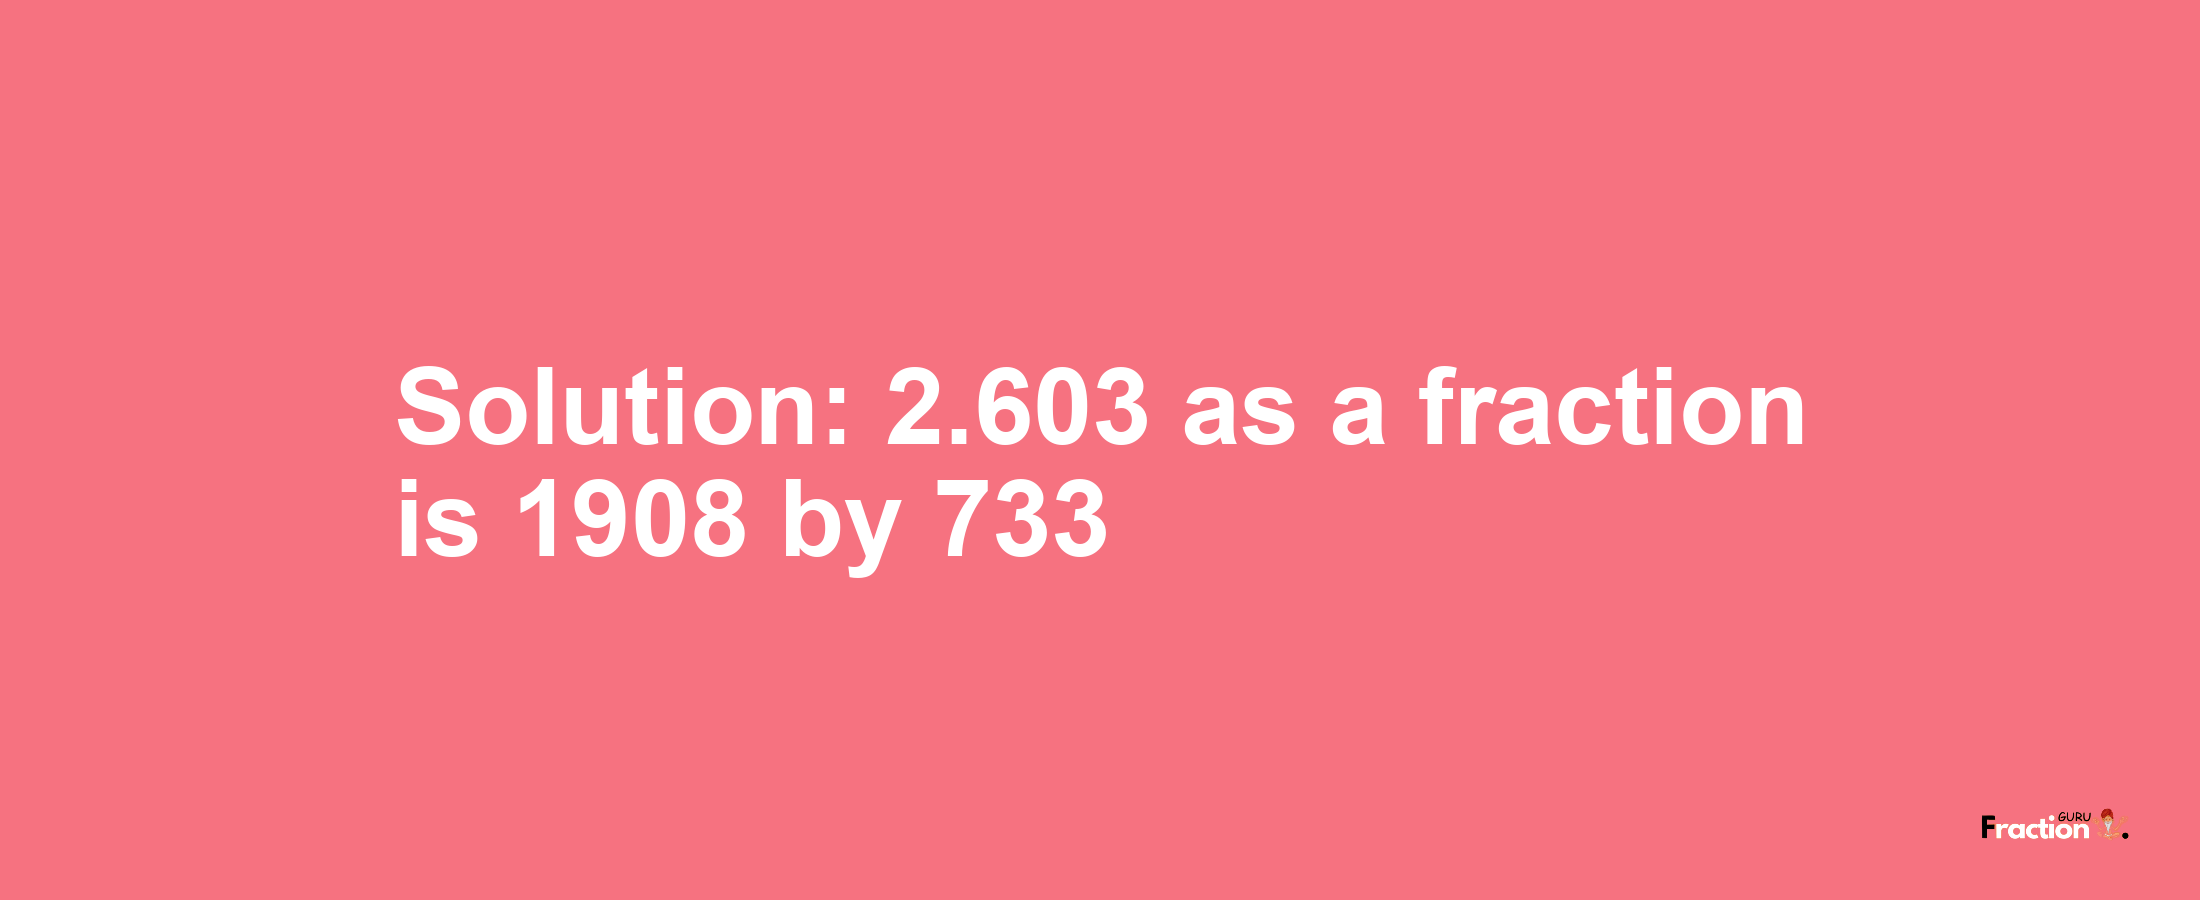 Solution:2.603 as a fraction is 1908/733